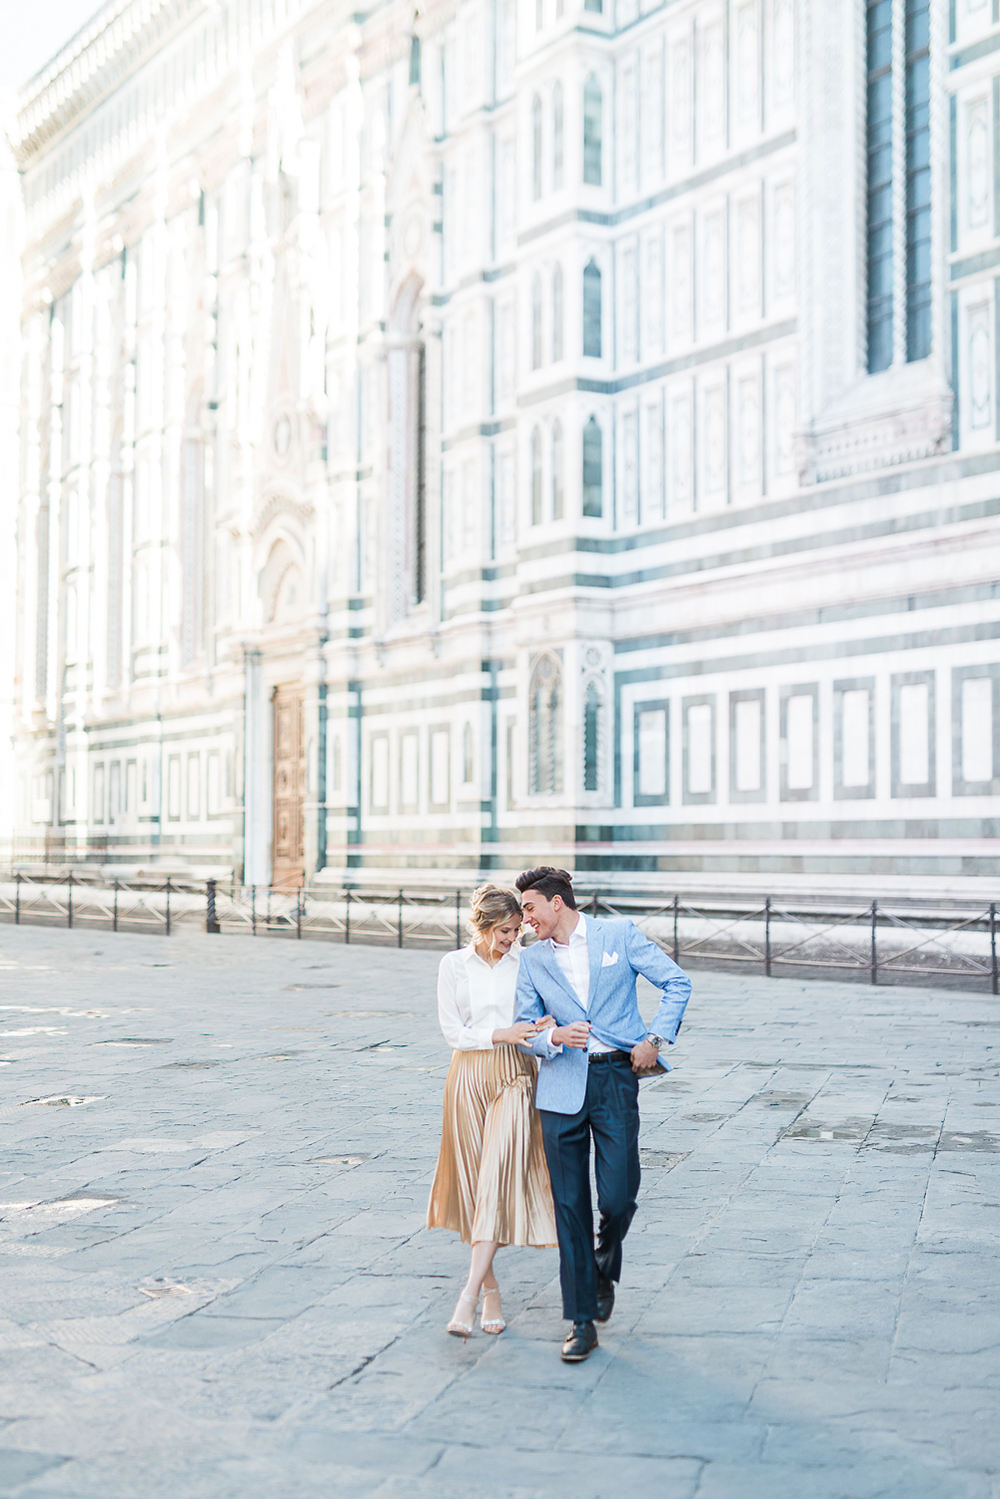 engagement-florence-italy